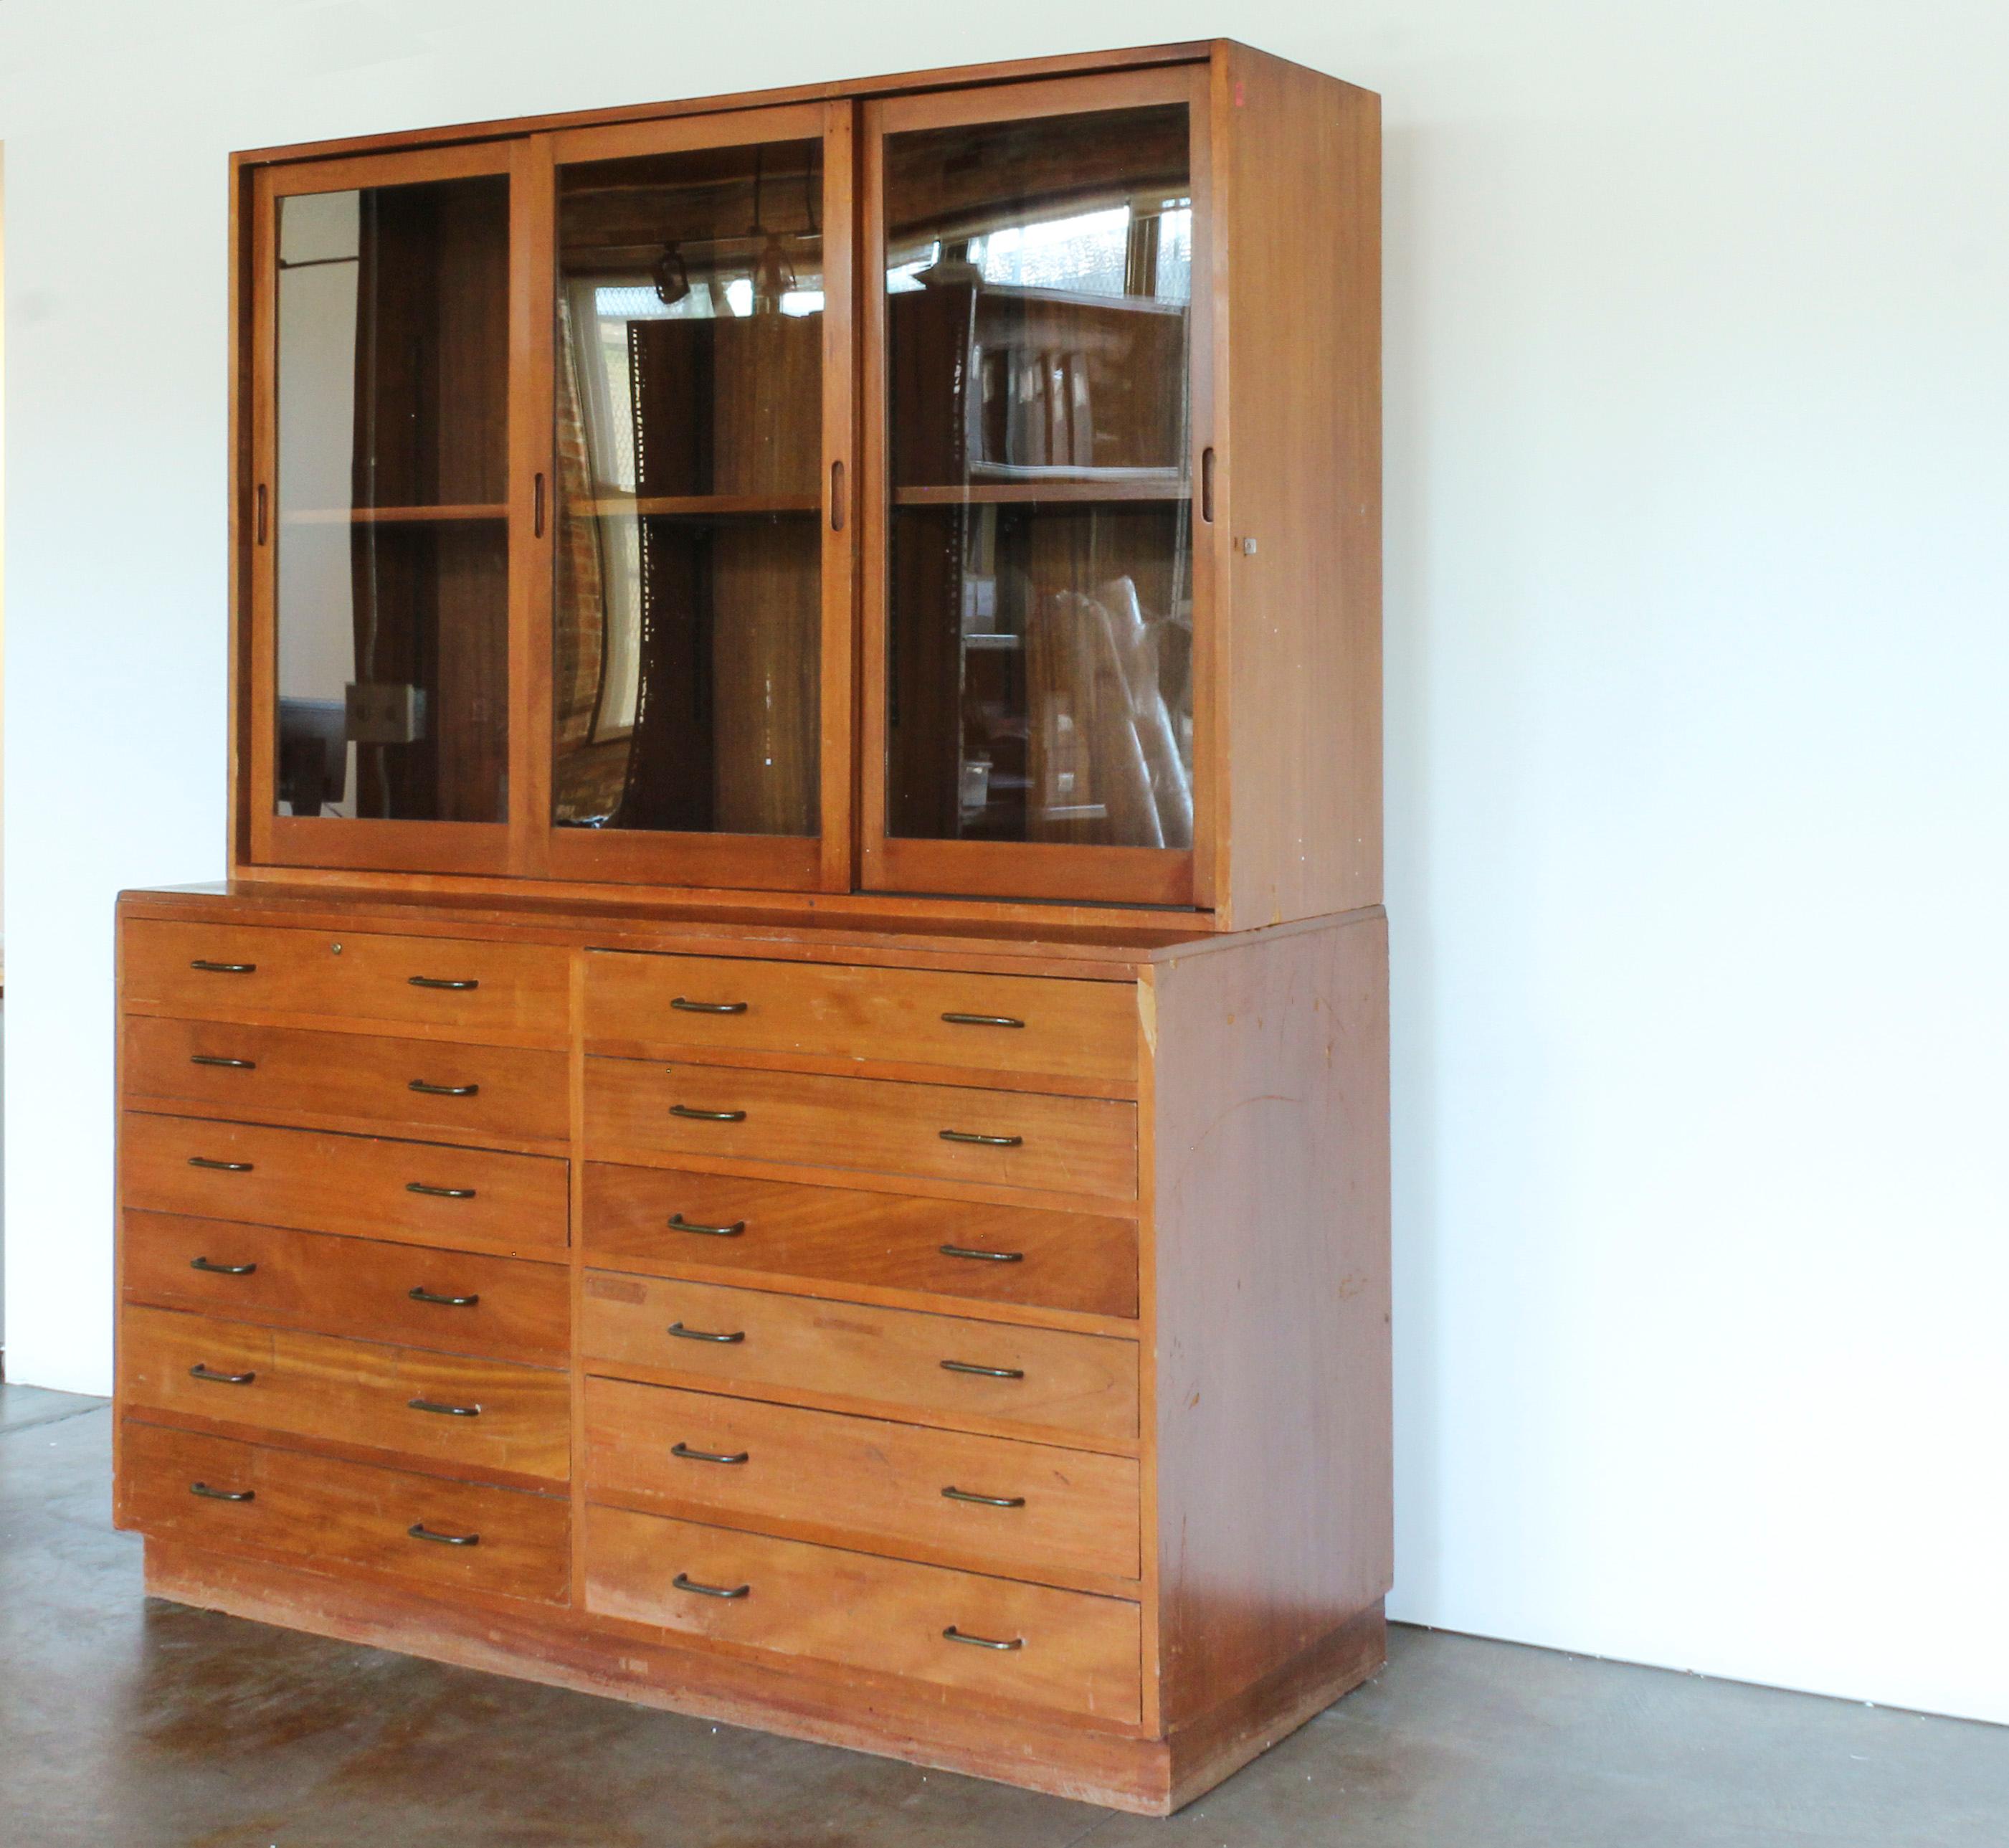 Midcentury American mahogany bookcase with 12 drawers and three glass sliding doors. Adjustable shelf in upper portion. 

Upper cabinet: 17.75